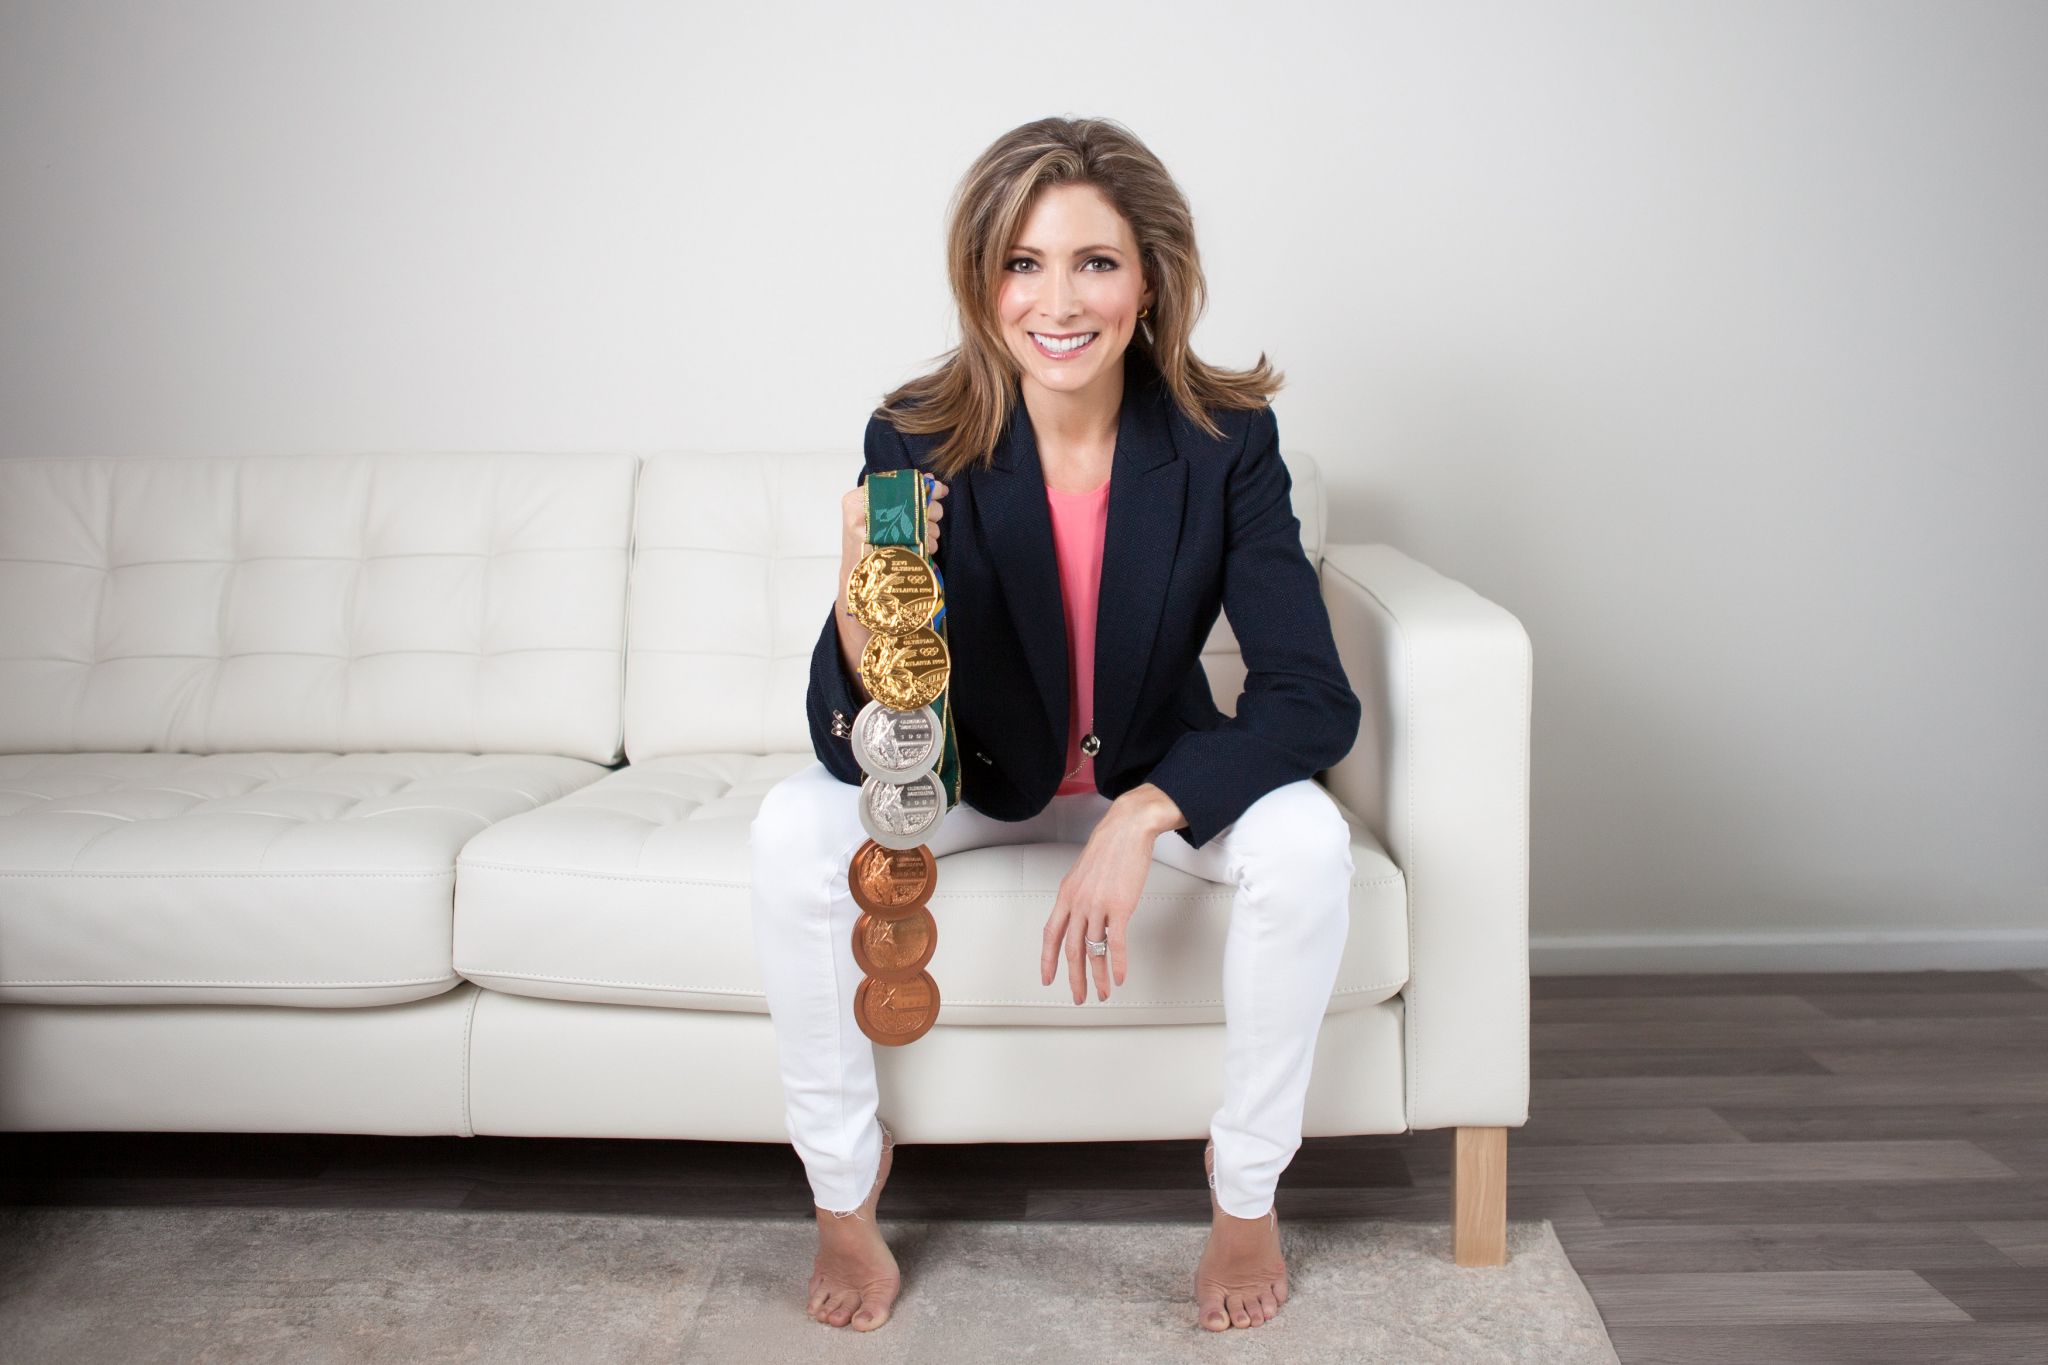 Shotguns and Stilettos to feature Olympic gymnast Shannon Miller.